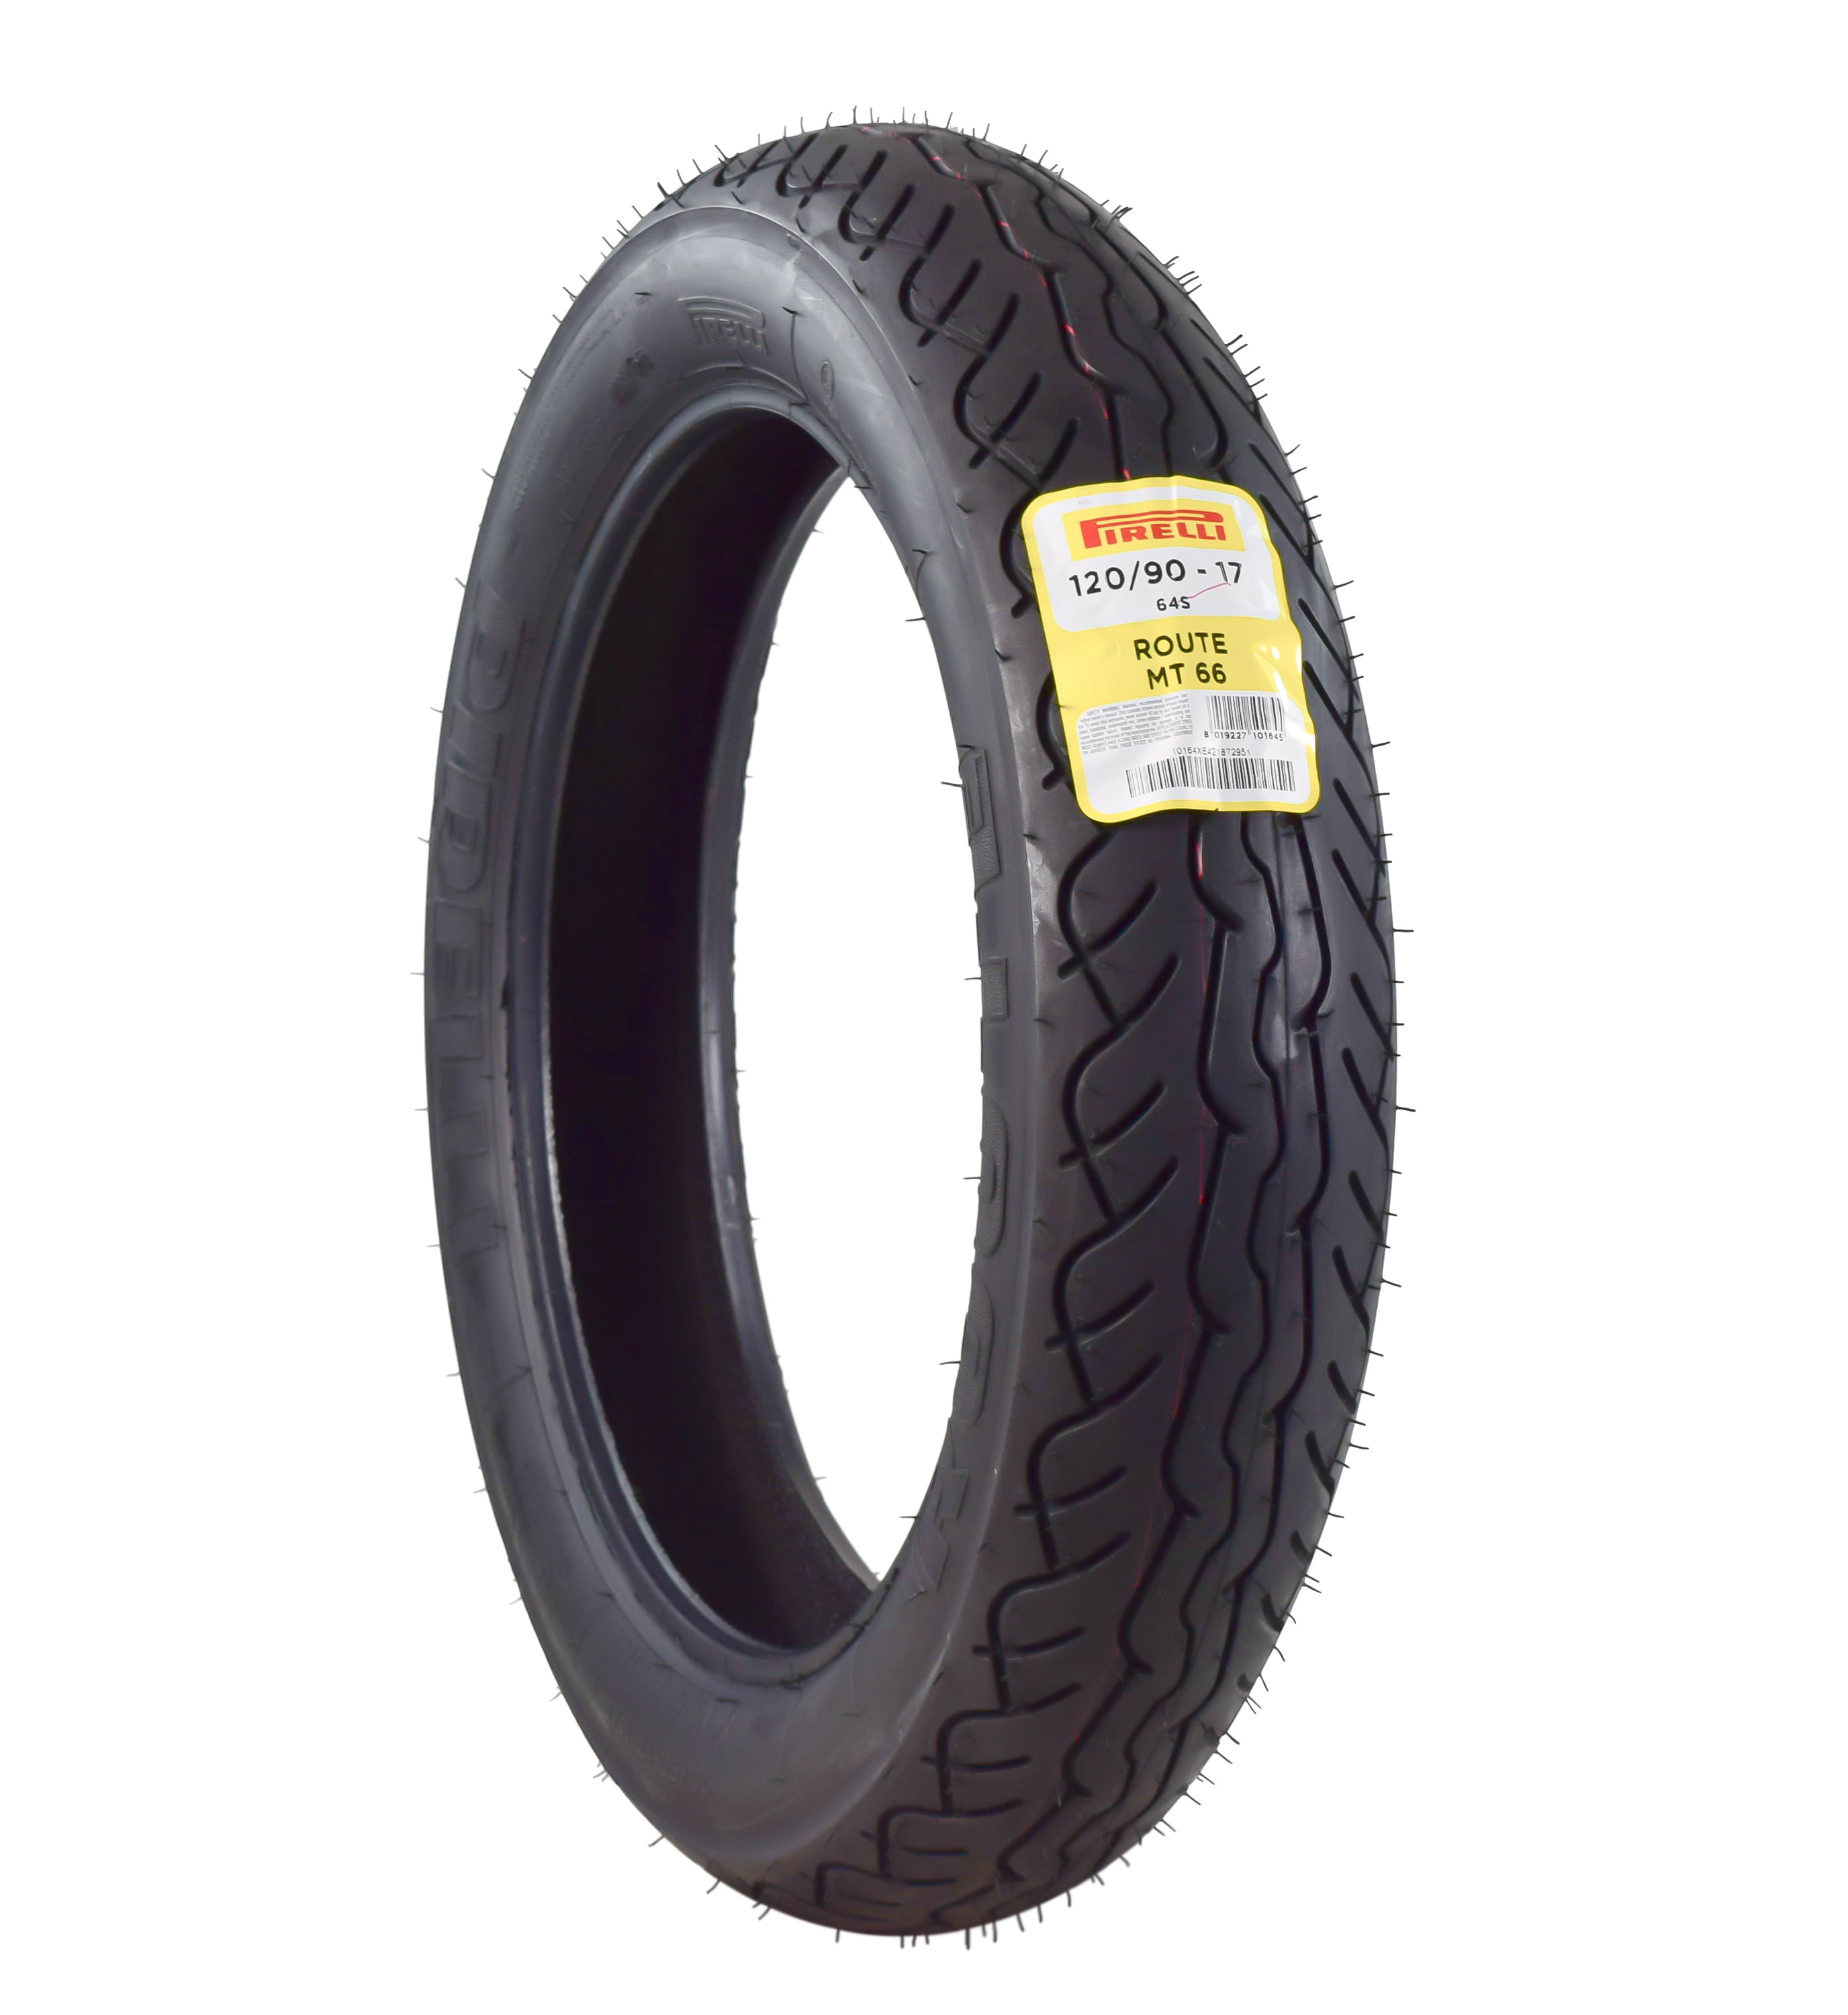 Details about   Pirelli Motorcycle Cruiser Tire MT 66 Route 120/90-17 Front A1 